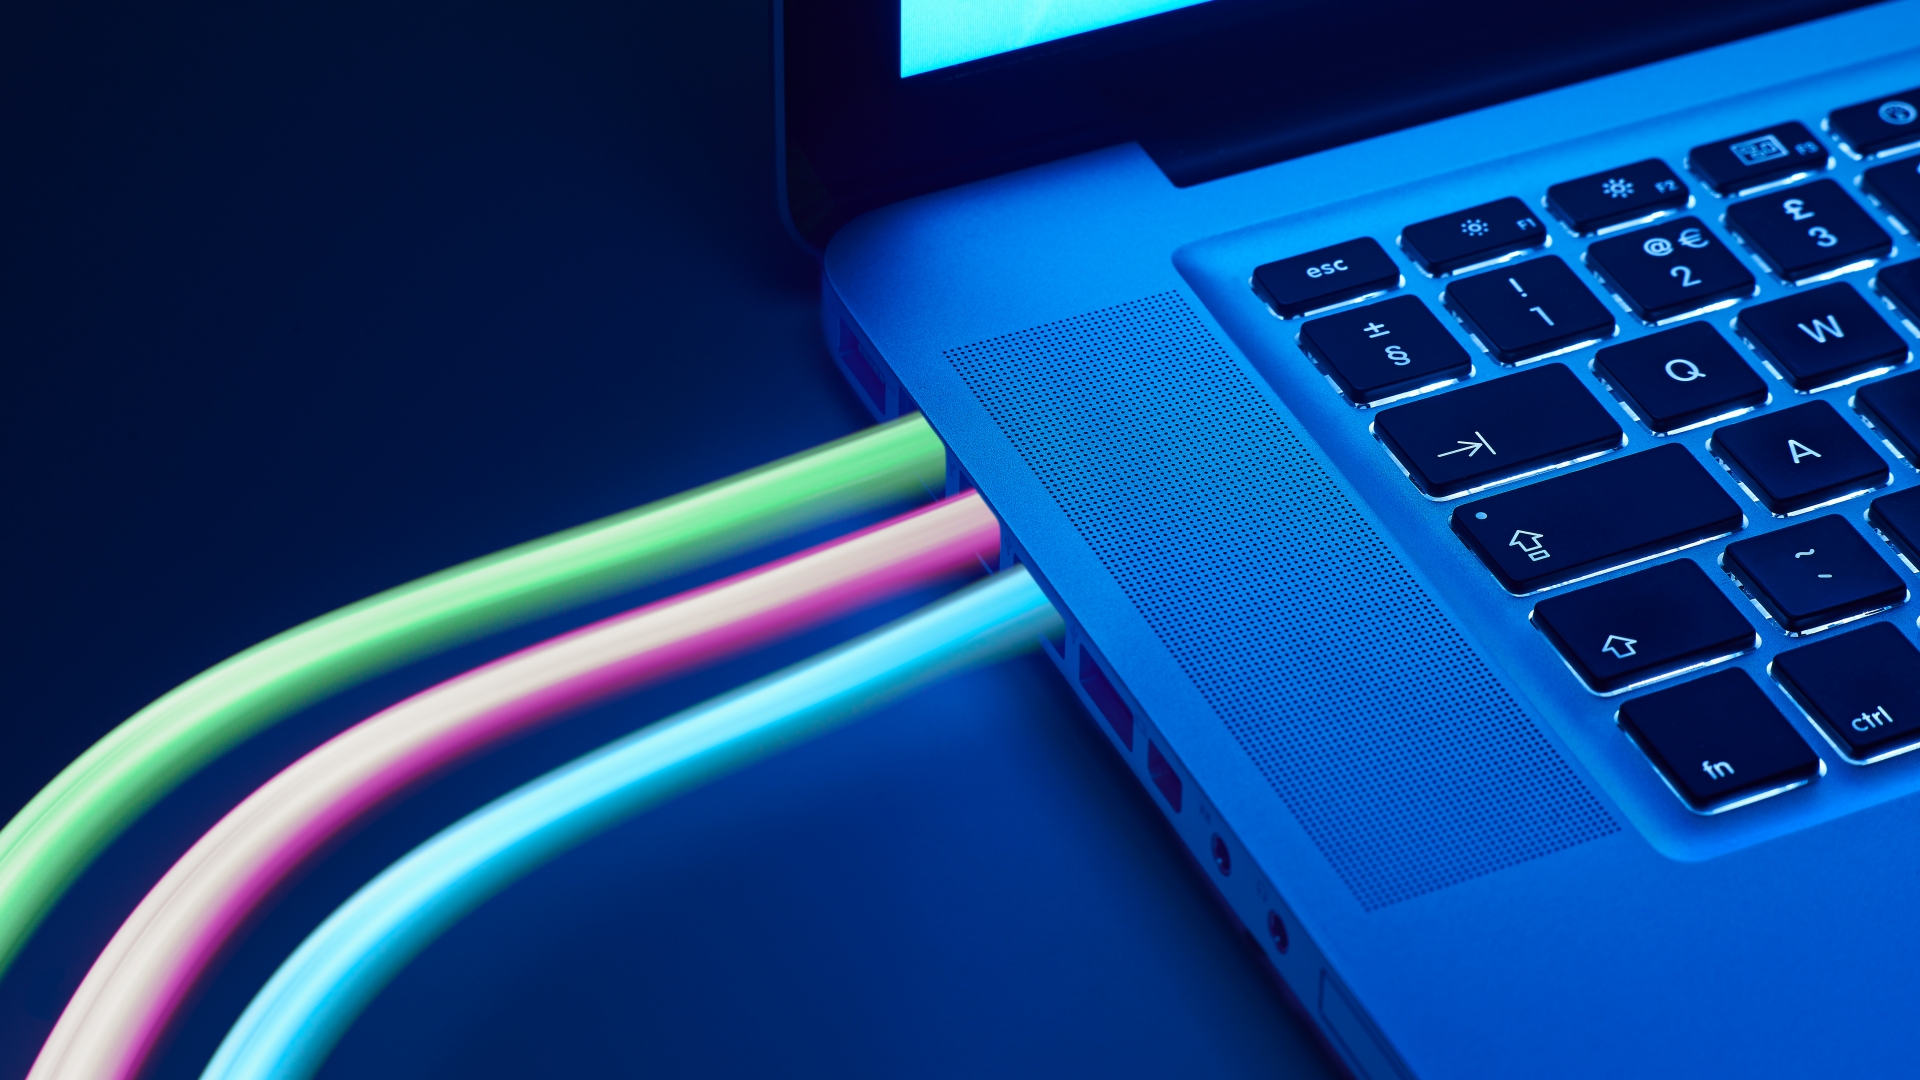 The worst broadband outages in cities – which area is yours?